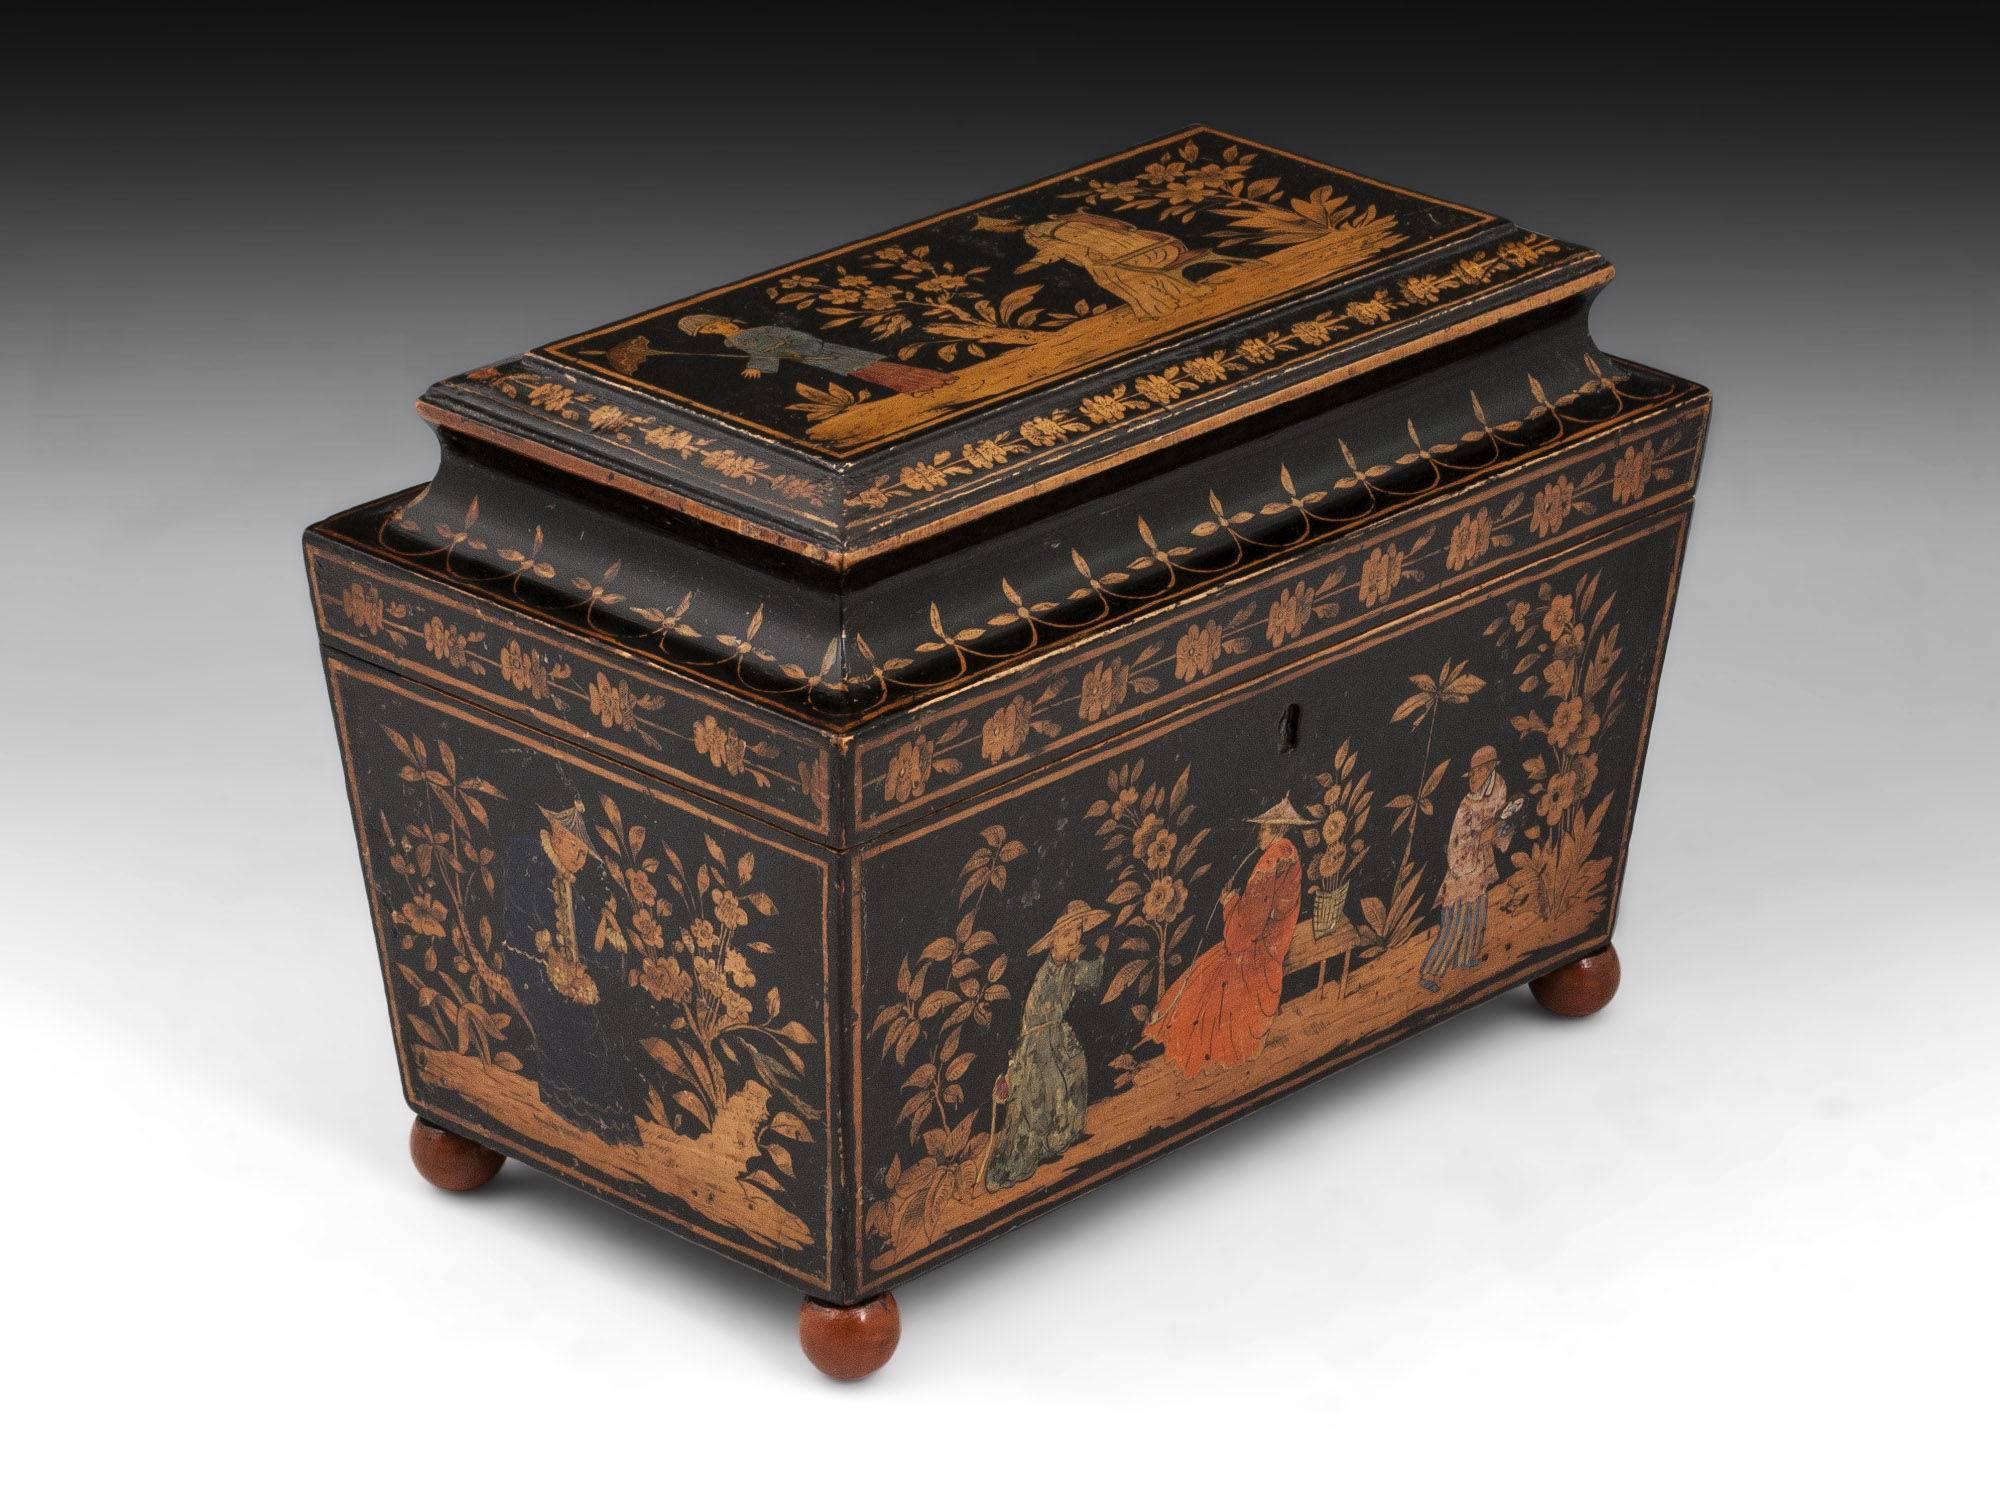 English Superb Regency Painted Penwork and Chinoiserie Sarcophagus Shaped Tea Caddy